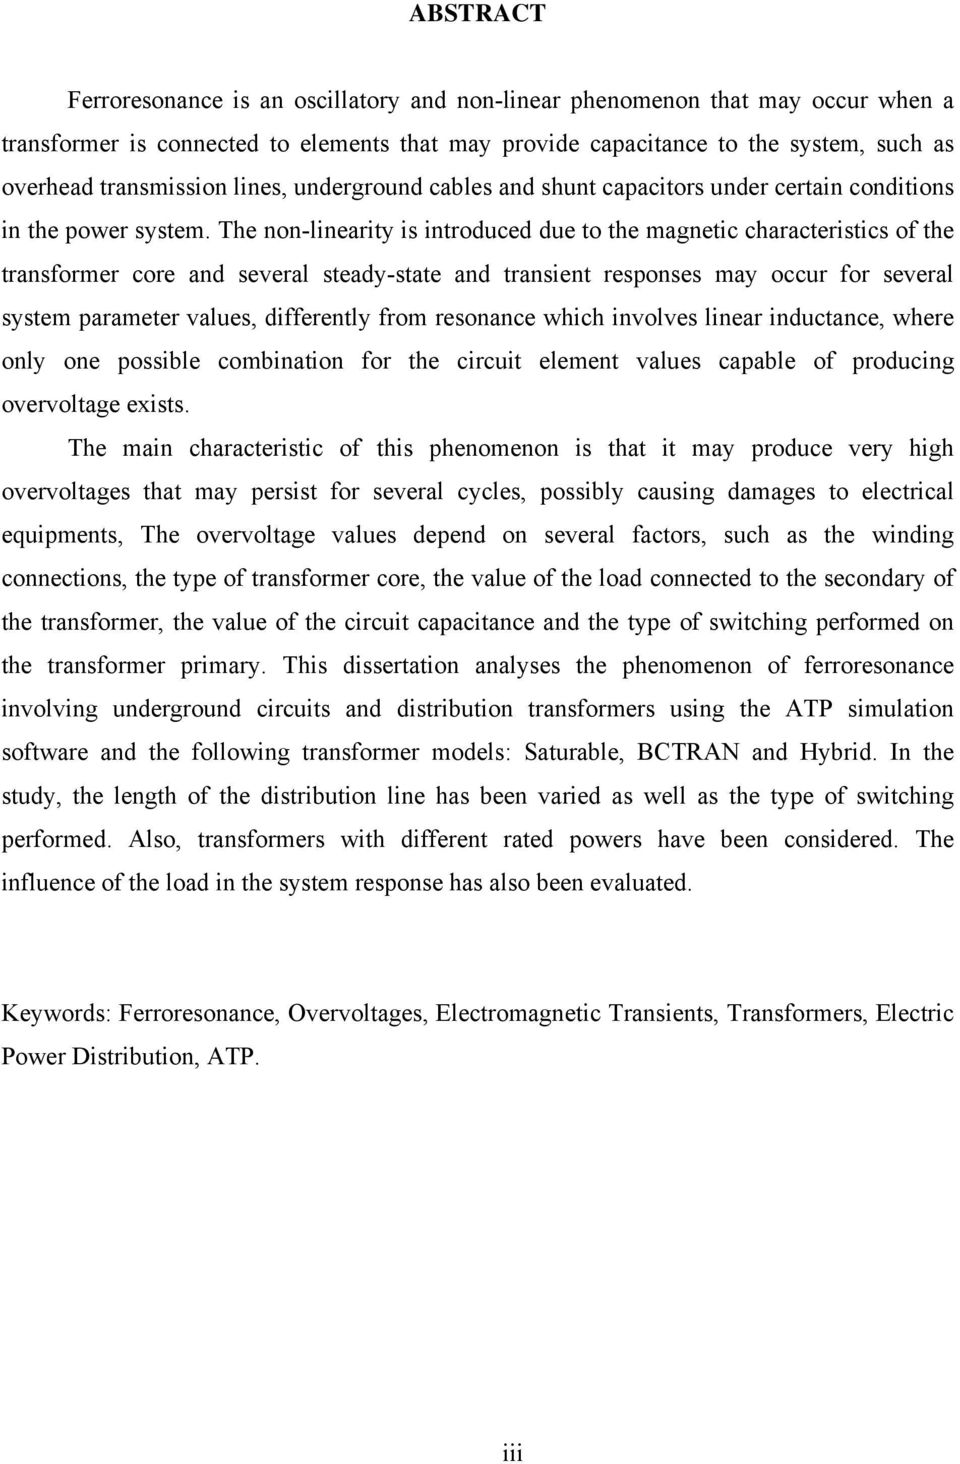 The non-linearity is introduced due to the magnetic characteristics of the transformer core and several steady-state and transient responses may occur for several system parameter values, differently